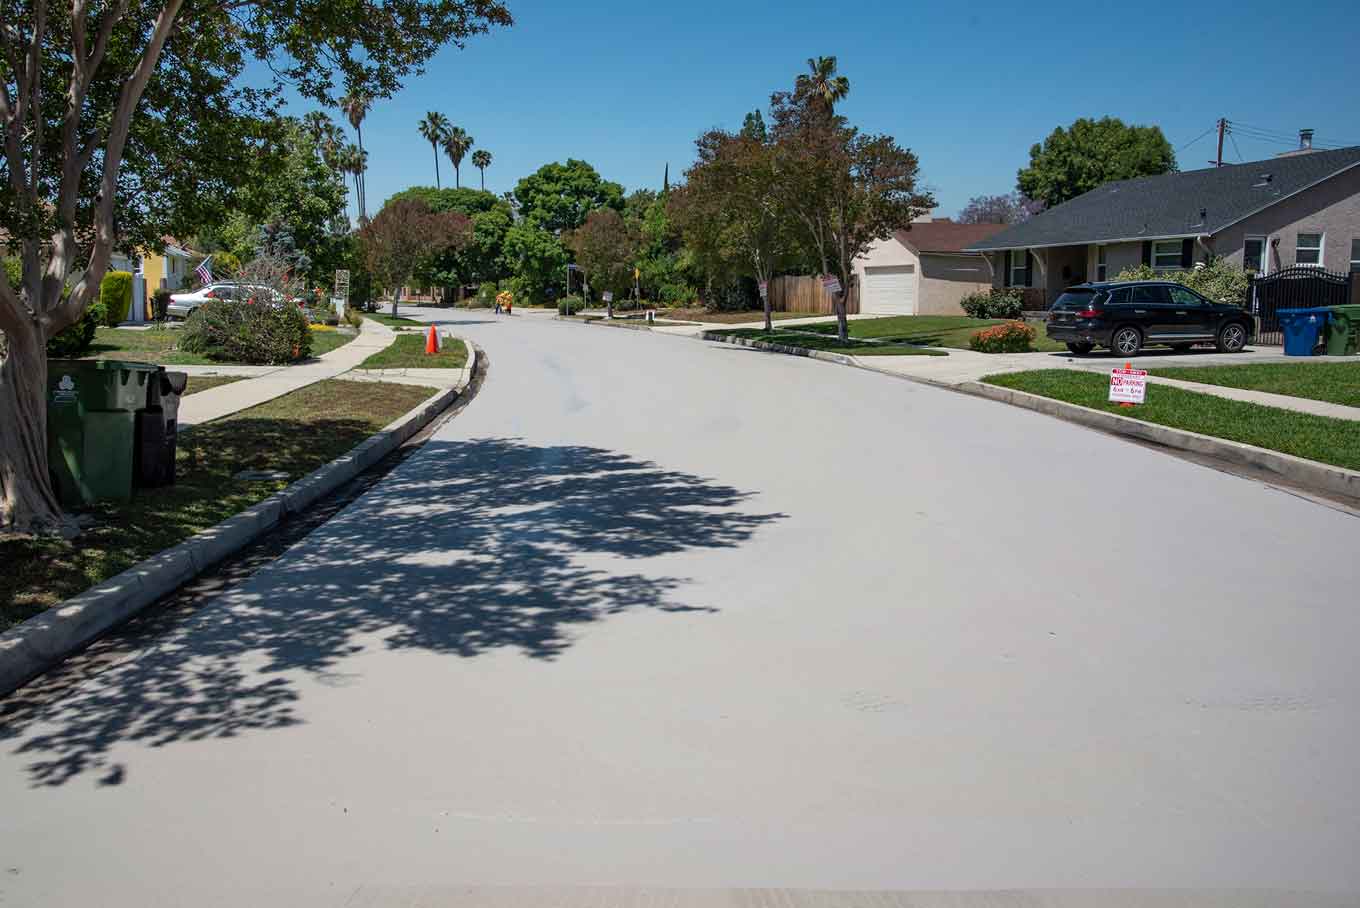 A street painted white to reflect the sun in a neighborhood in California